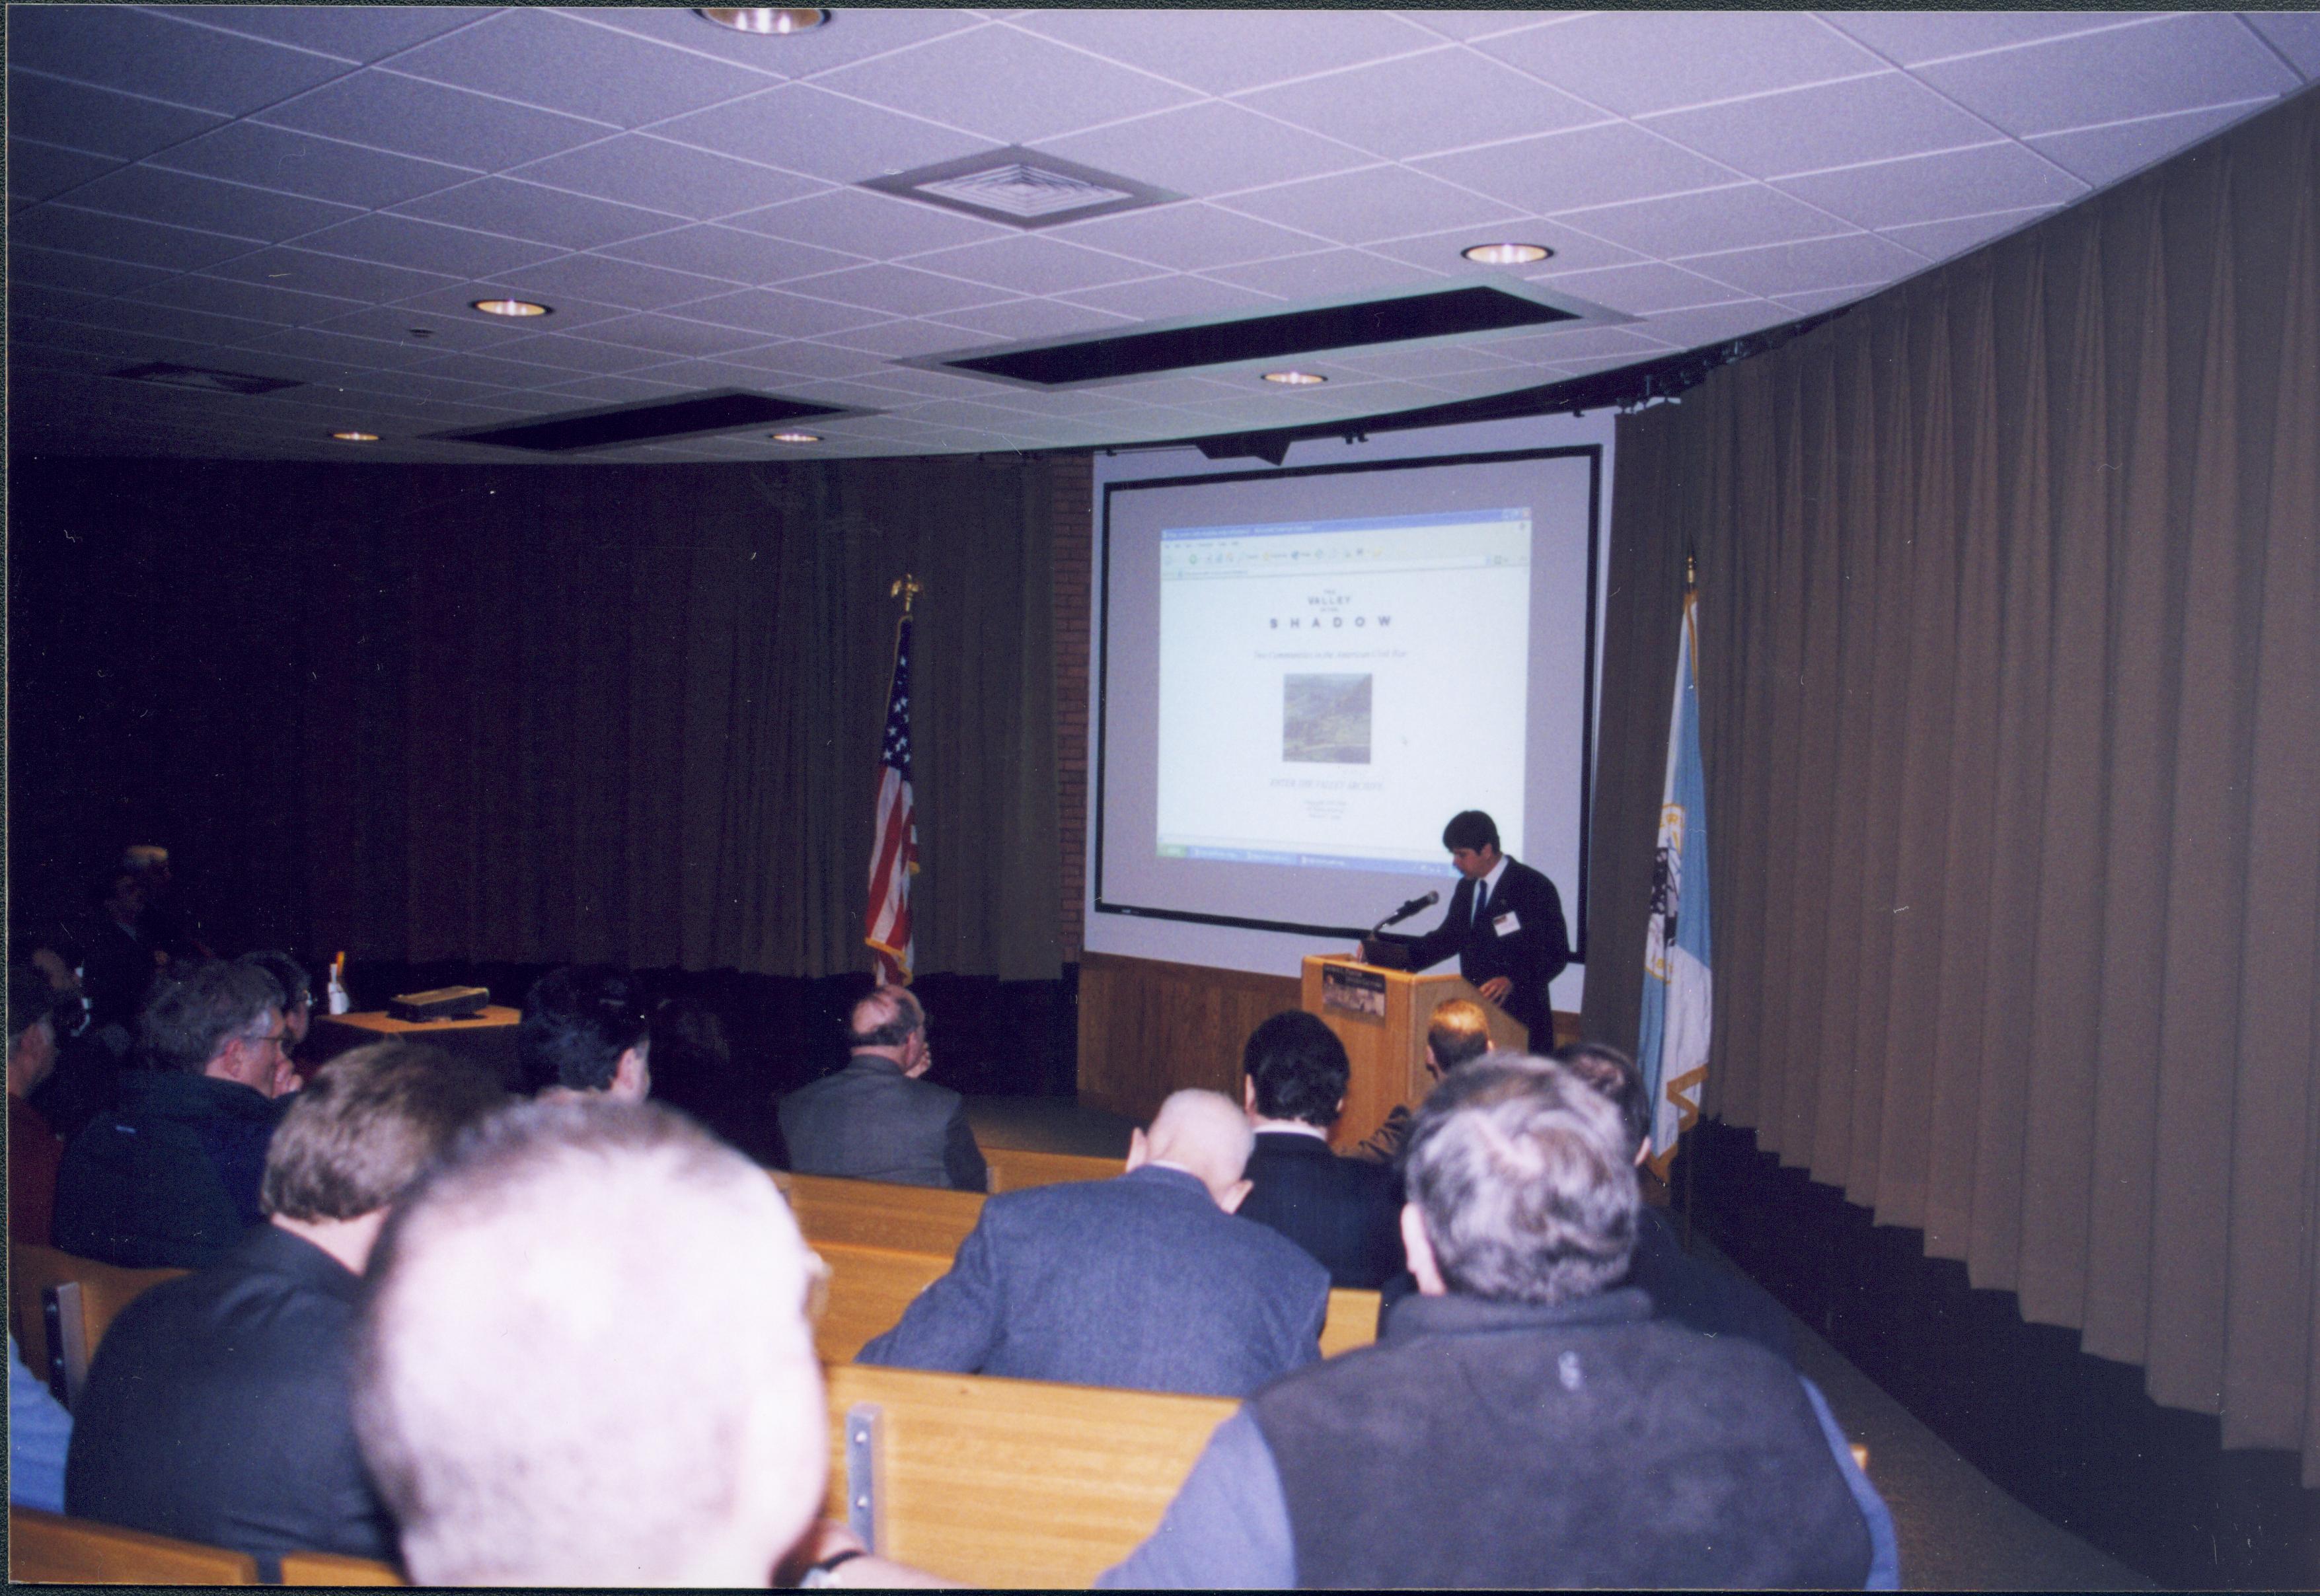 Lincoln's Birthday - Speaker William G. Thomas delivers a lecture and powerpoint program to crowd in Visitor Center. Curtains pulled back partly to allow for screen. Flags flank screen area and podium in front of theater Looking Southwest from back of Theater 1 Lincoln's Birthday, lecture, Theater 1, Visitor Center, visitors, flags, podium, screen